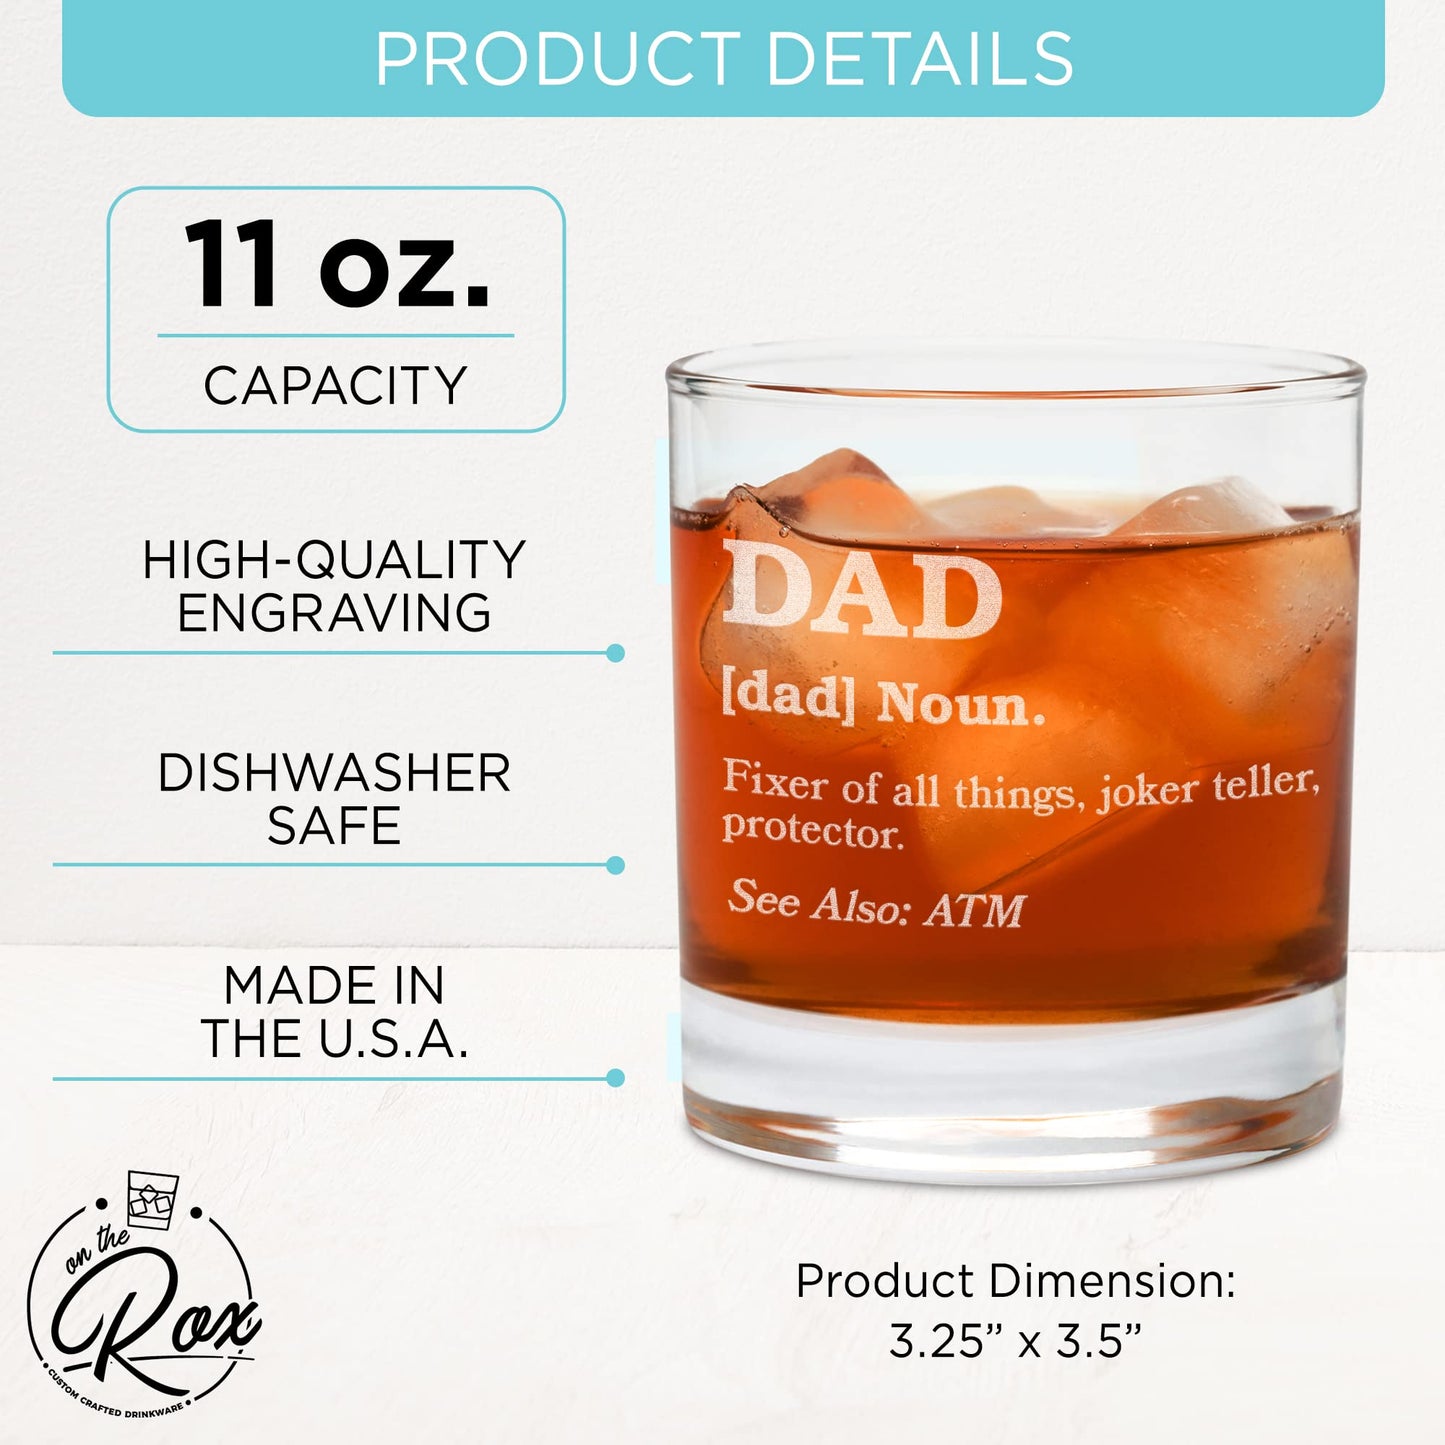 Whiskey Gifts for Dad- 11 Oz "Dad Definition" Engraved Whiskey Glass - Father's Day Gift, Dad Birthday Gifts From Daughter, Wife or Son - Bourbon Glass - Old Fashion Glass - 6 Designs To Choose From